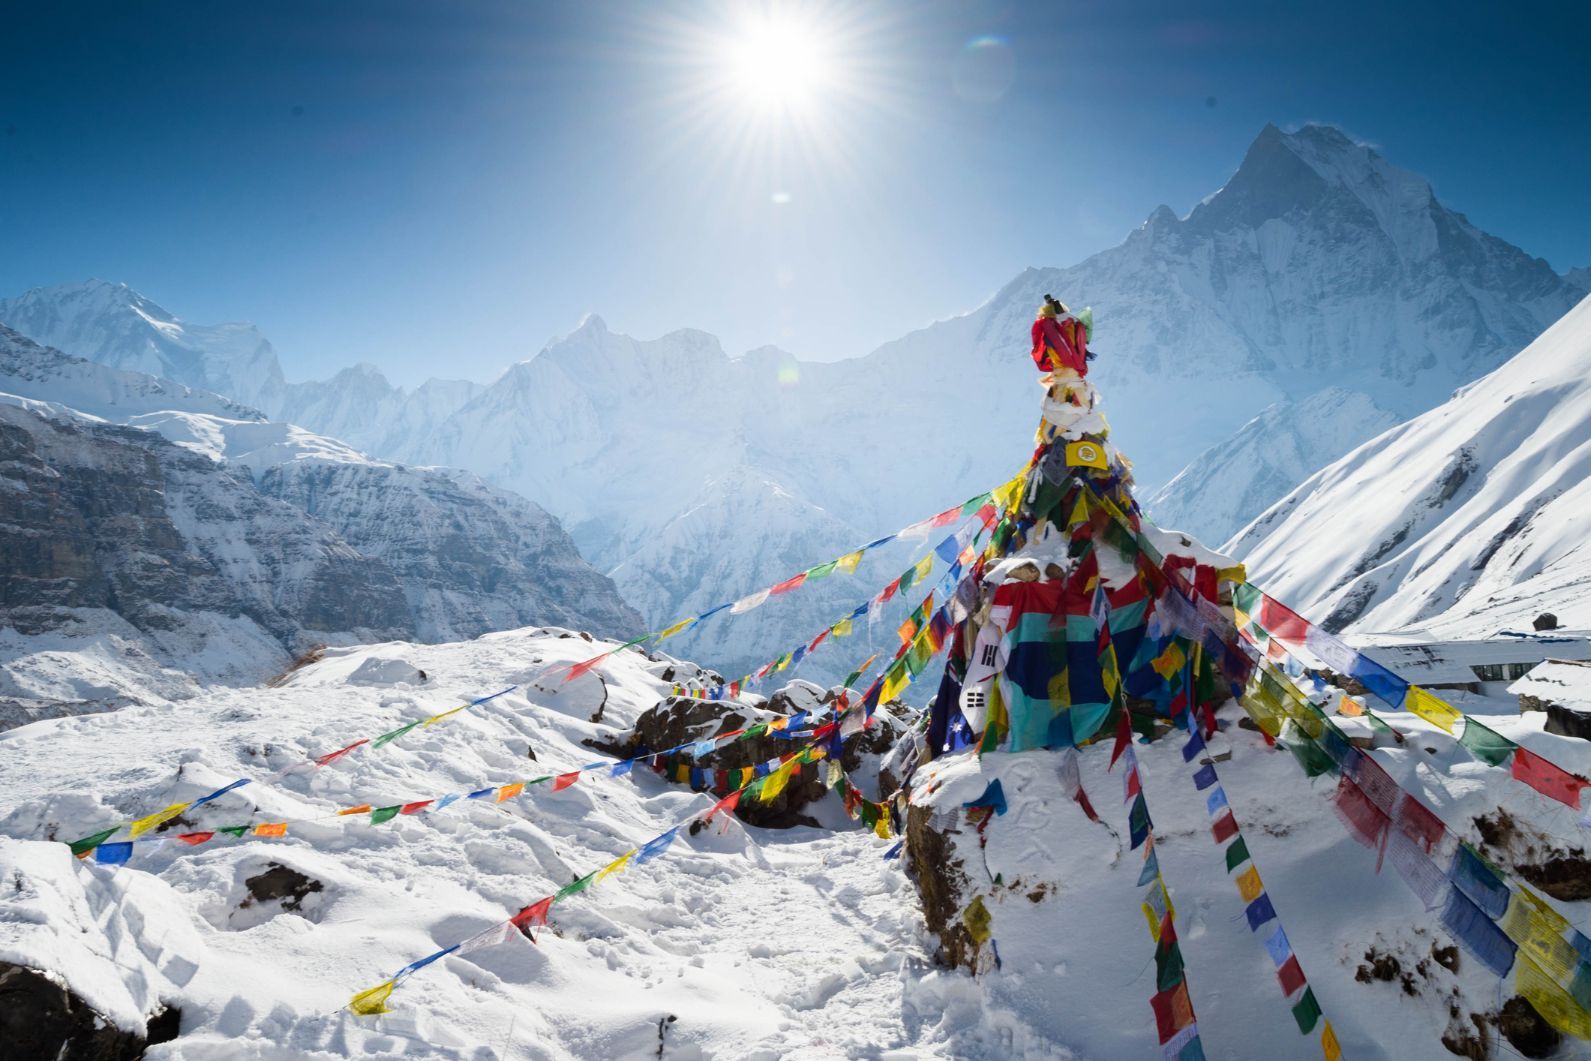 Prayer flags overlook a beautiful Himalayan landscape. This is a scene often spotted on both the Annapurna Sanctuary Trek and Annapurna Circuit.